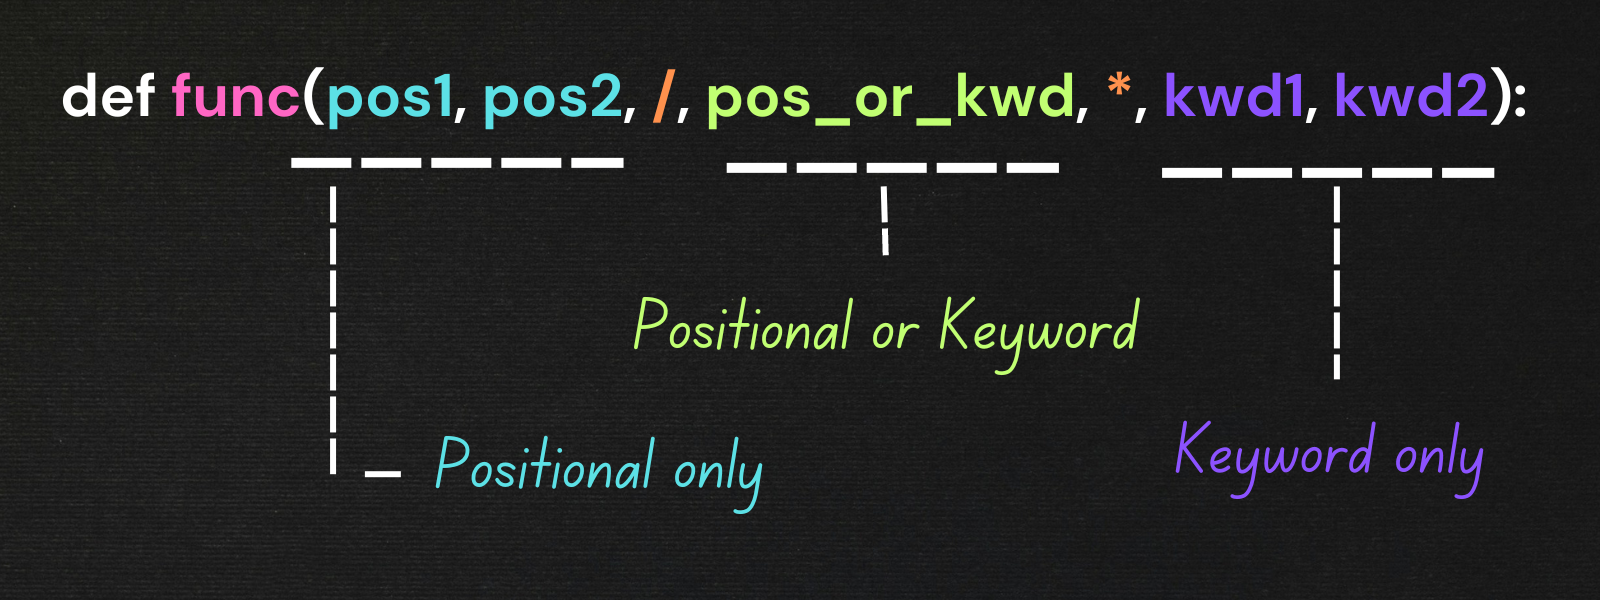 Visual representation of a function definition containing slash and asterisk indicating positional-only and keyword-only parameters